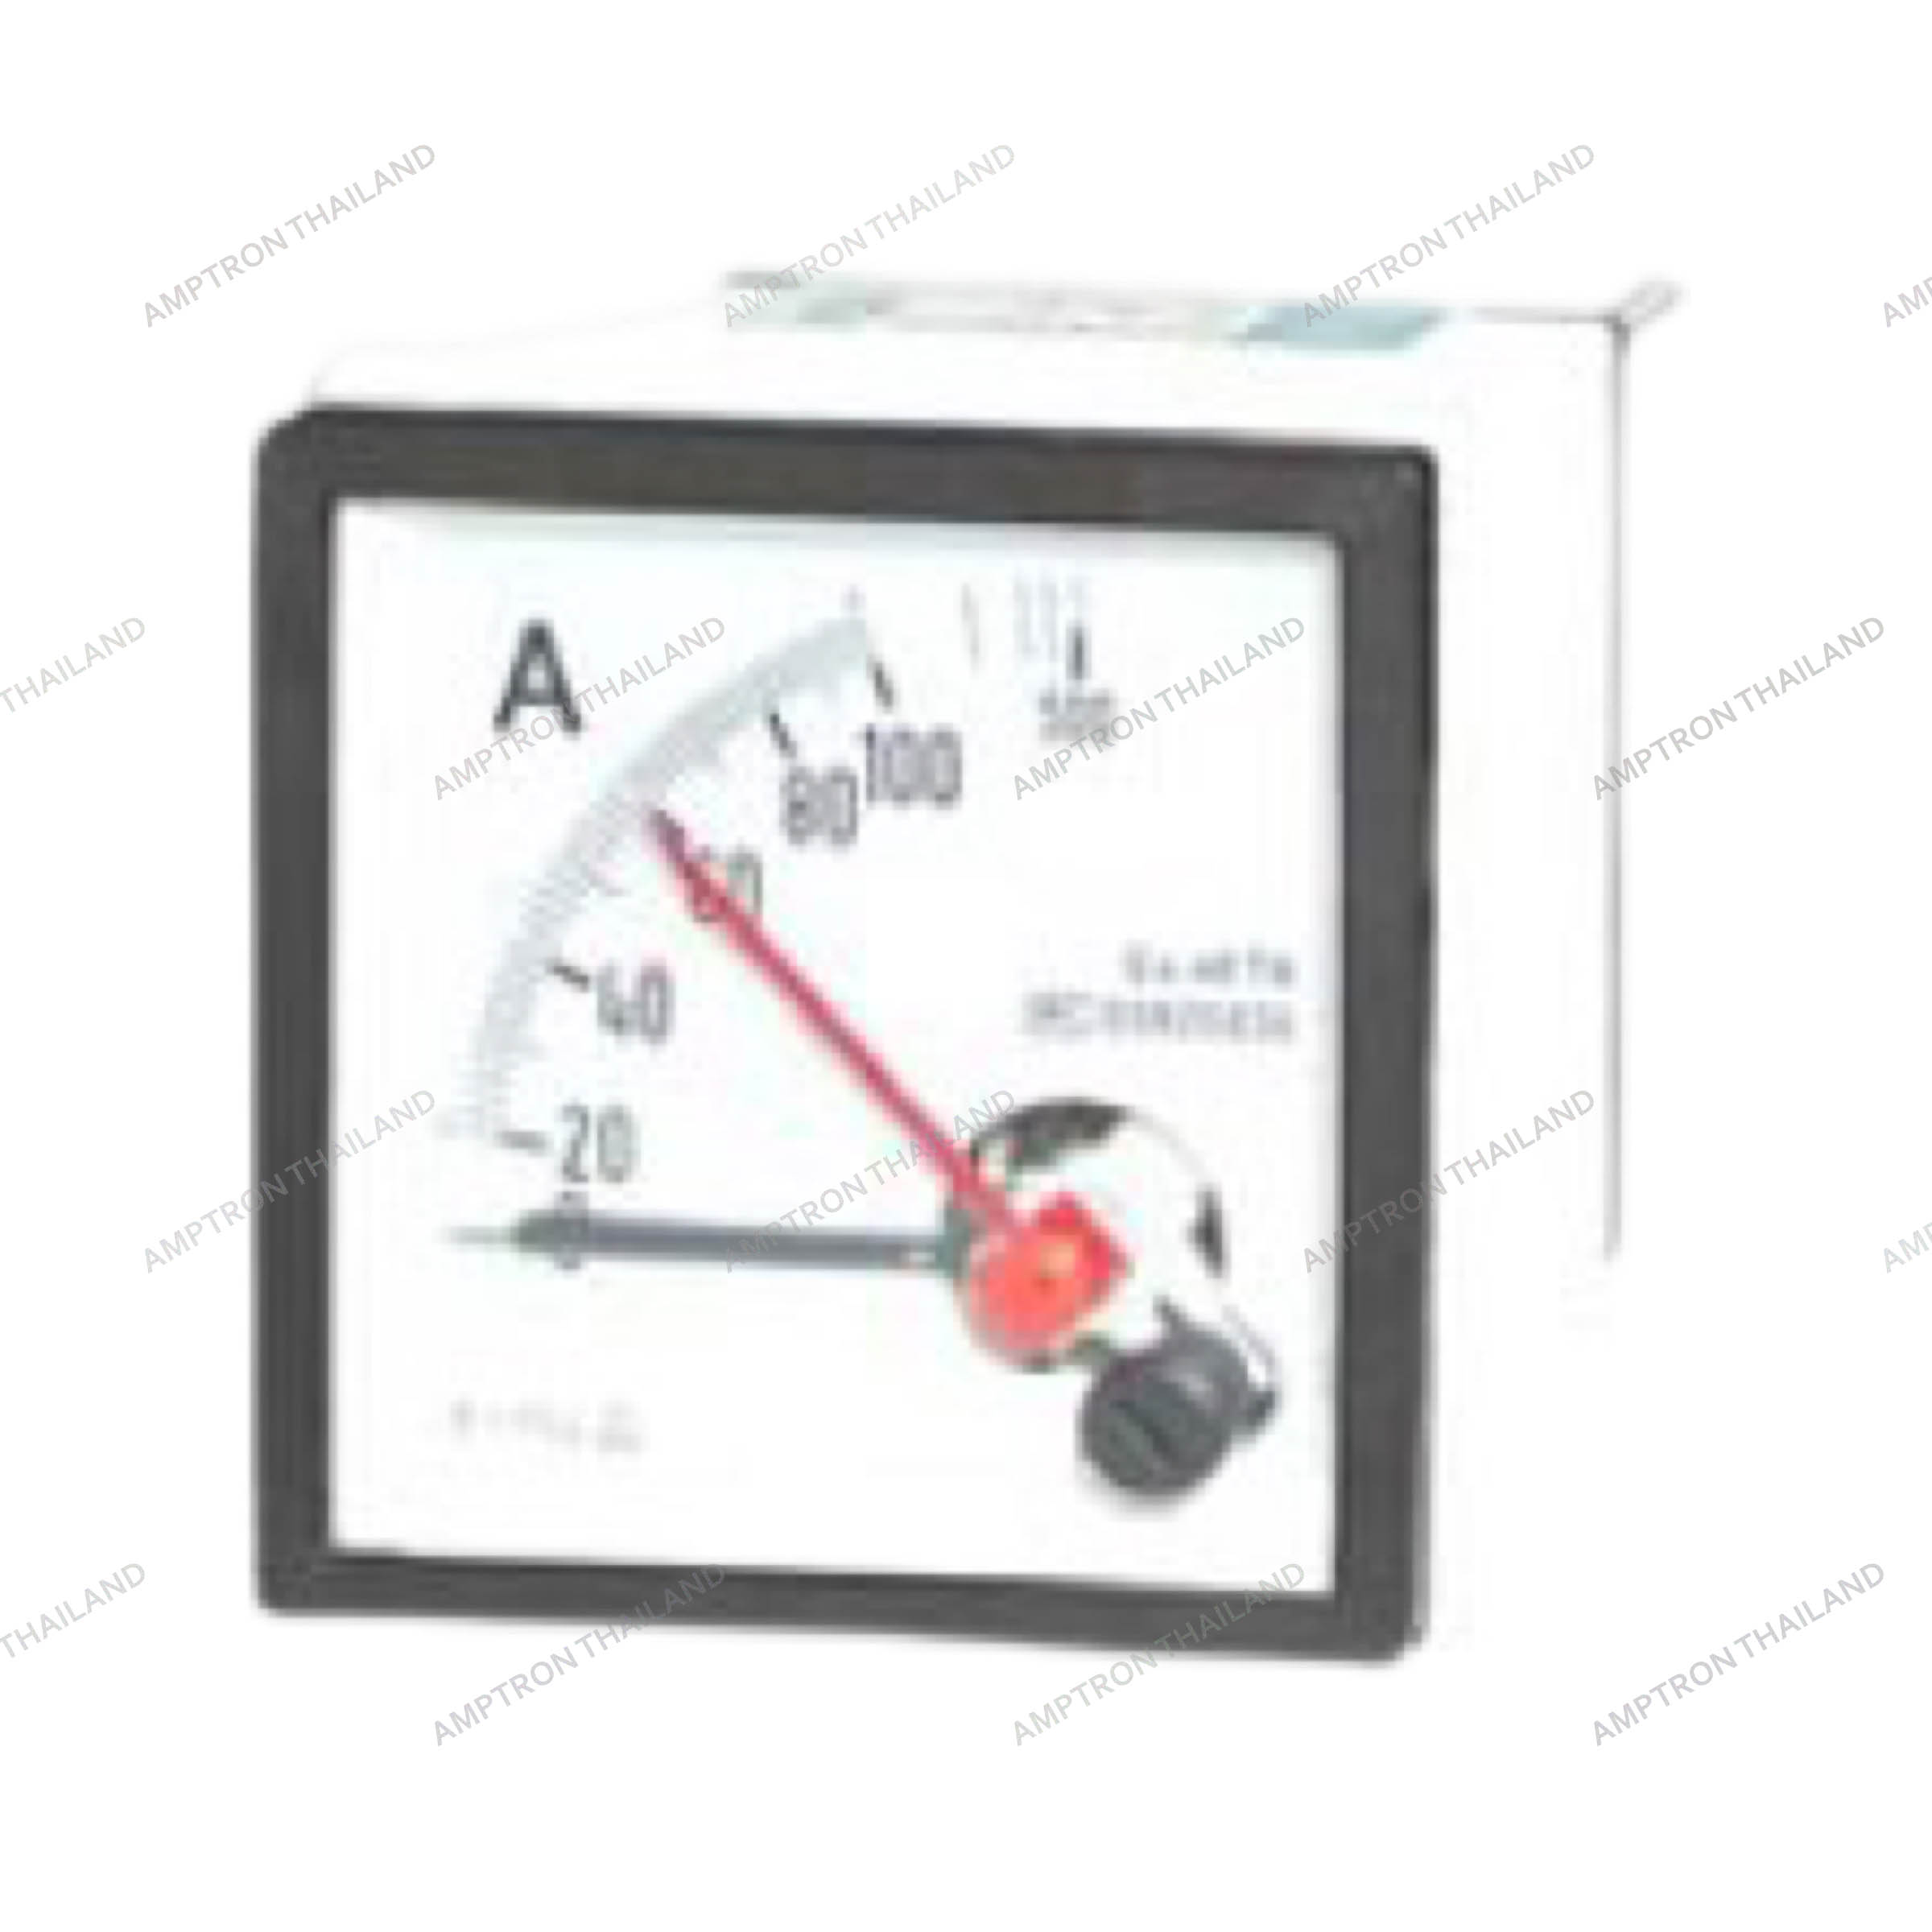 Moving Coil Rectifier Volt & Amp Meter with Maximum Pointer Din panel, Analog meter